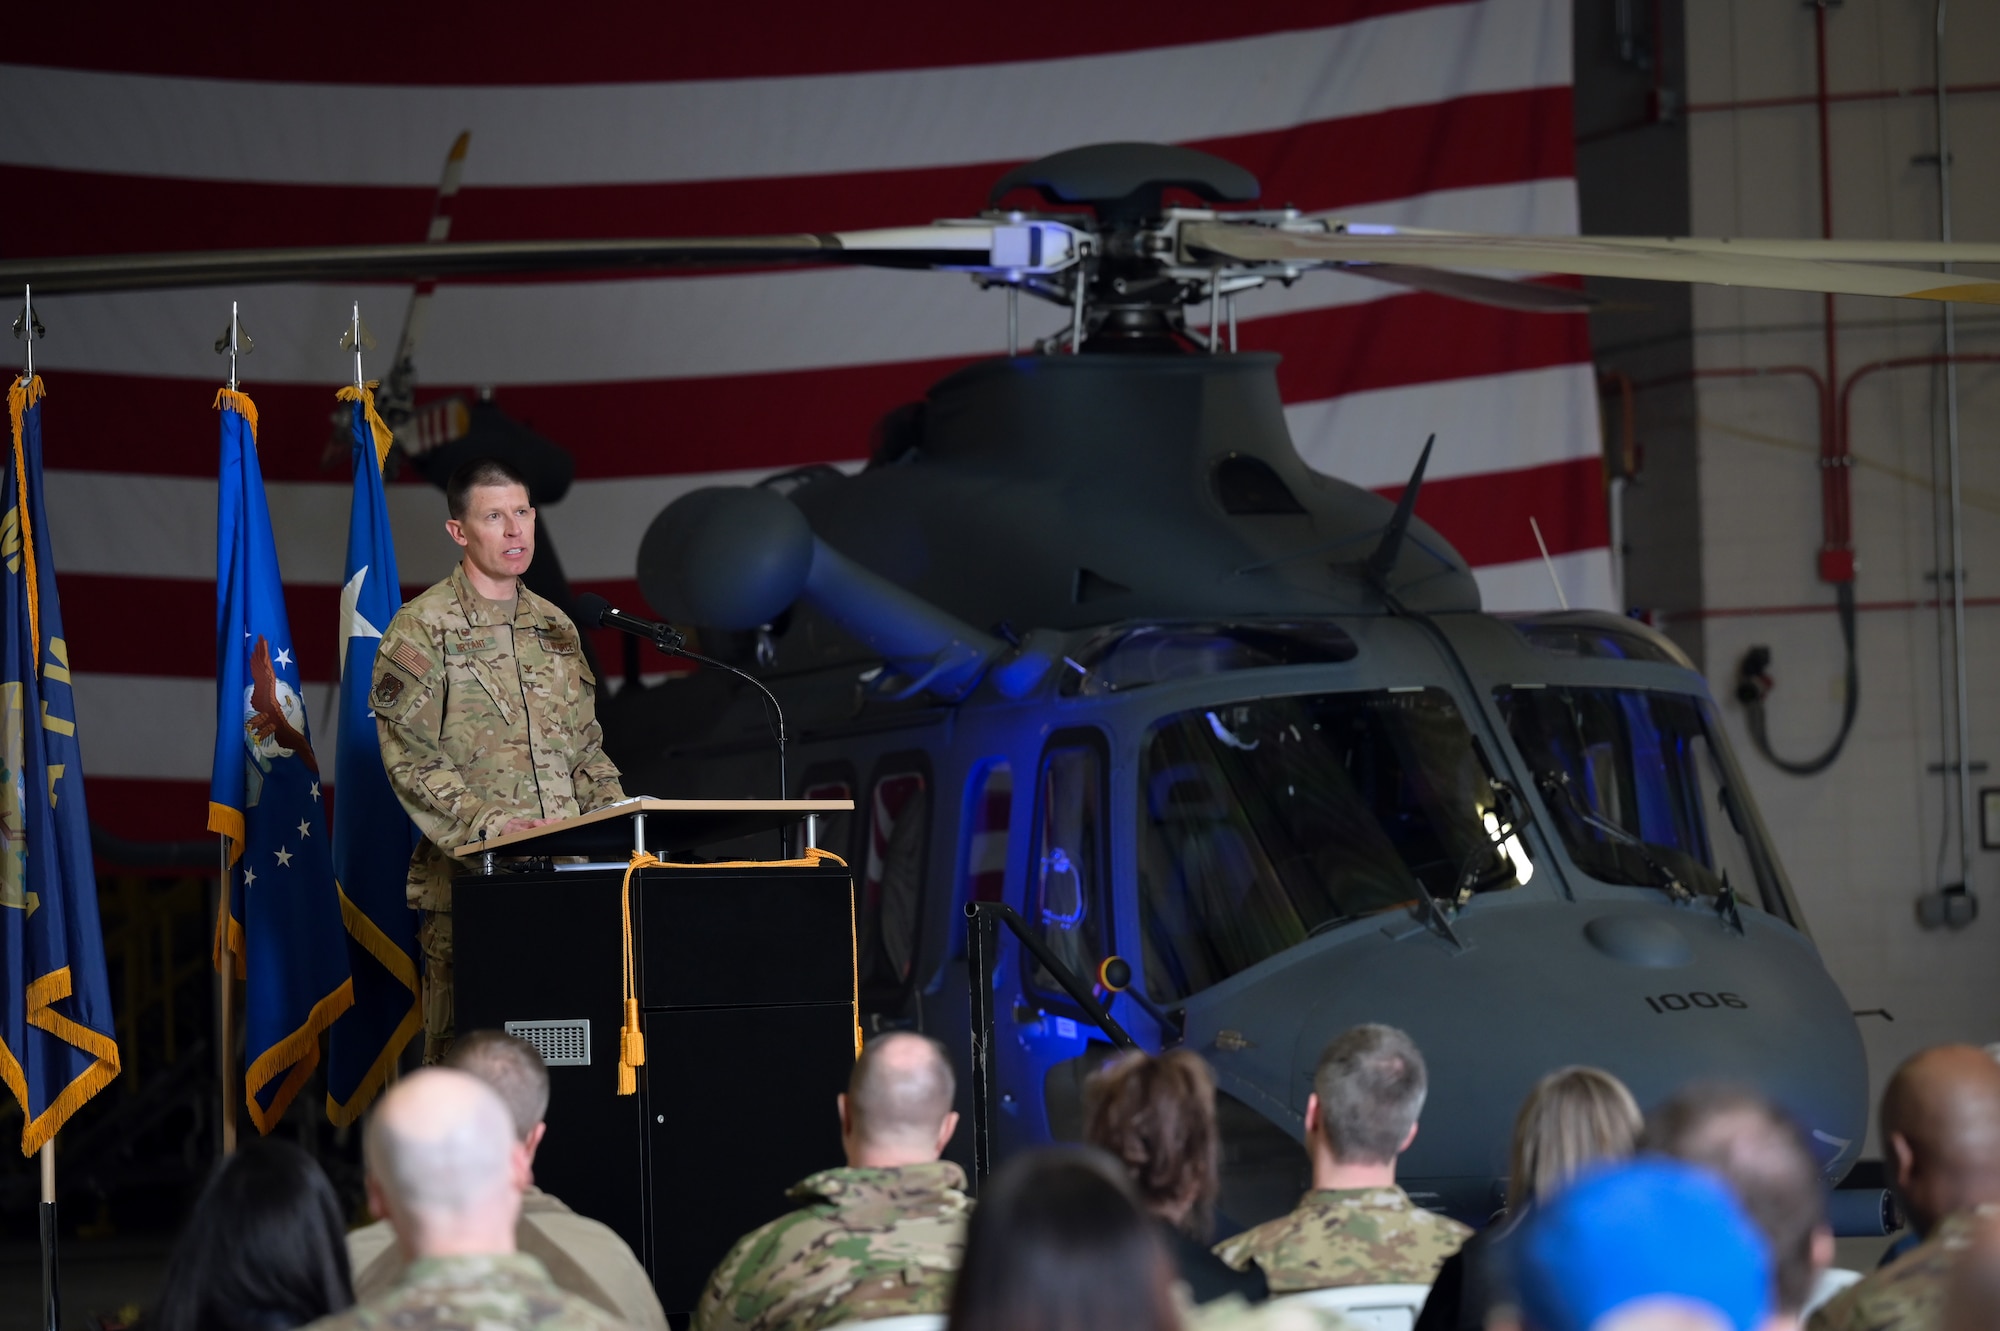 A man in military uniform stands behind a podium and speaks into a microphone as he addresses a seated crowd in an aircraft hangar.